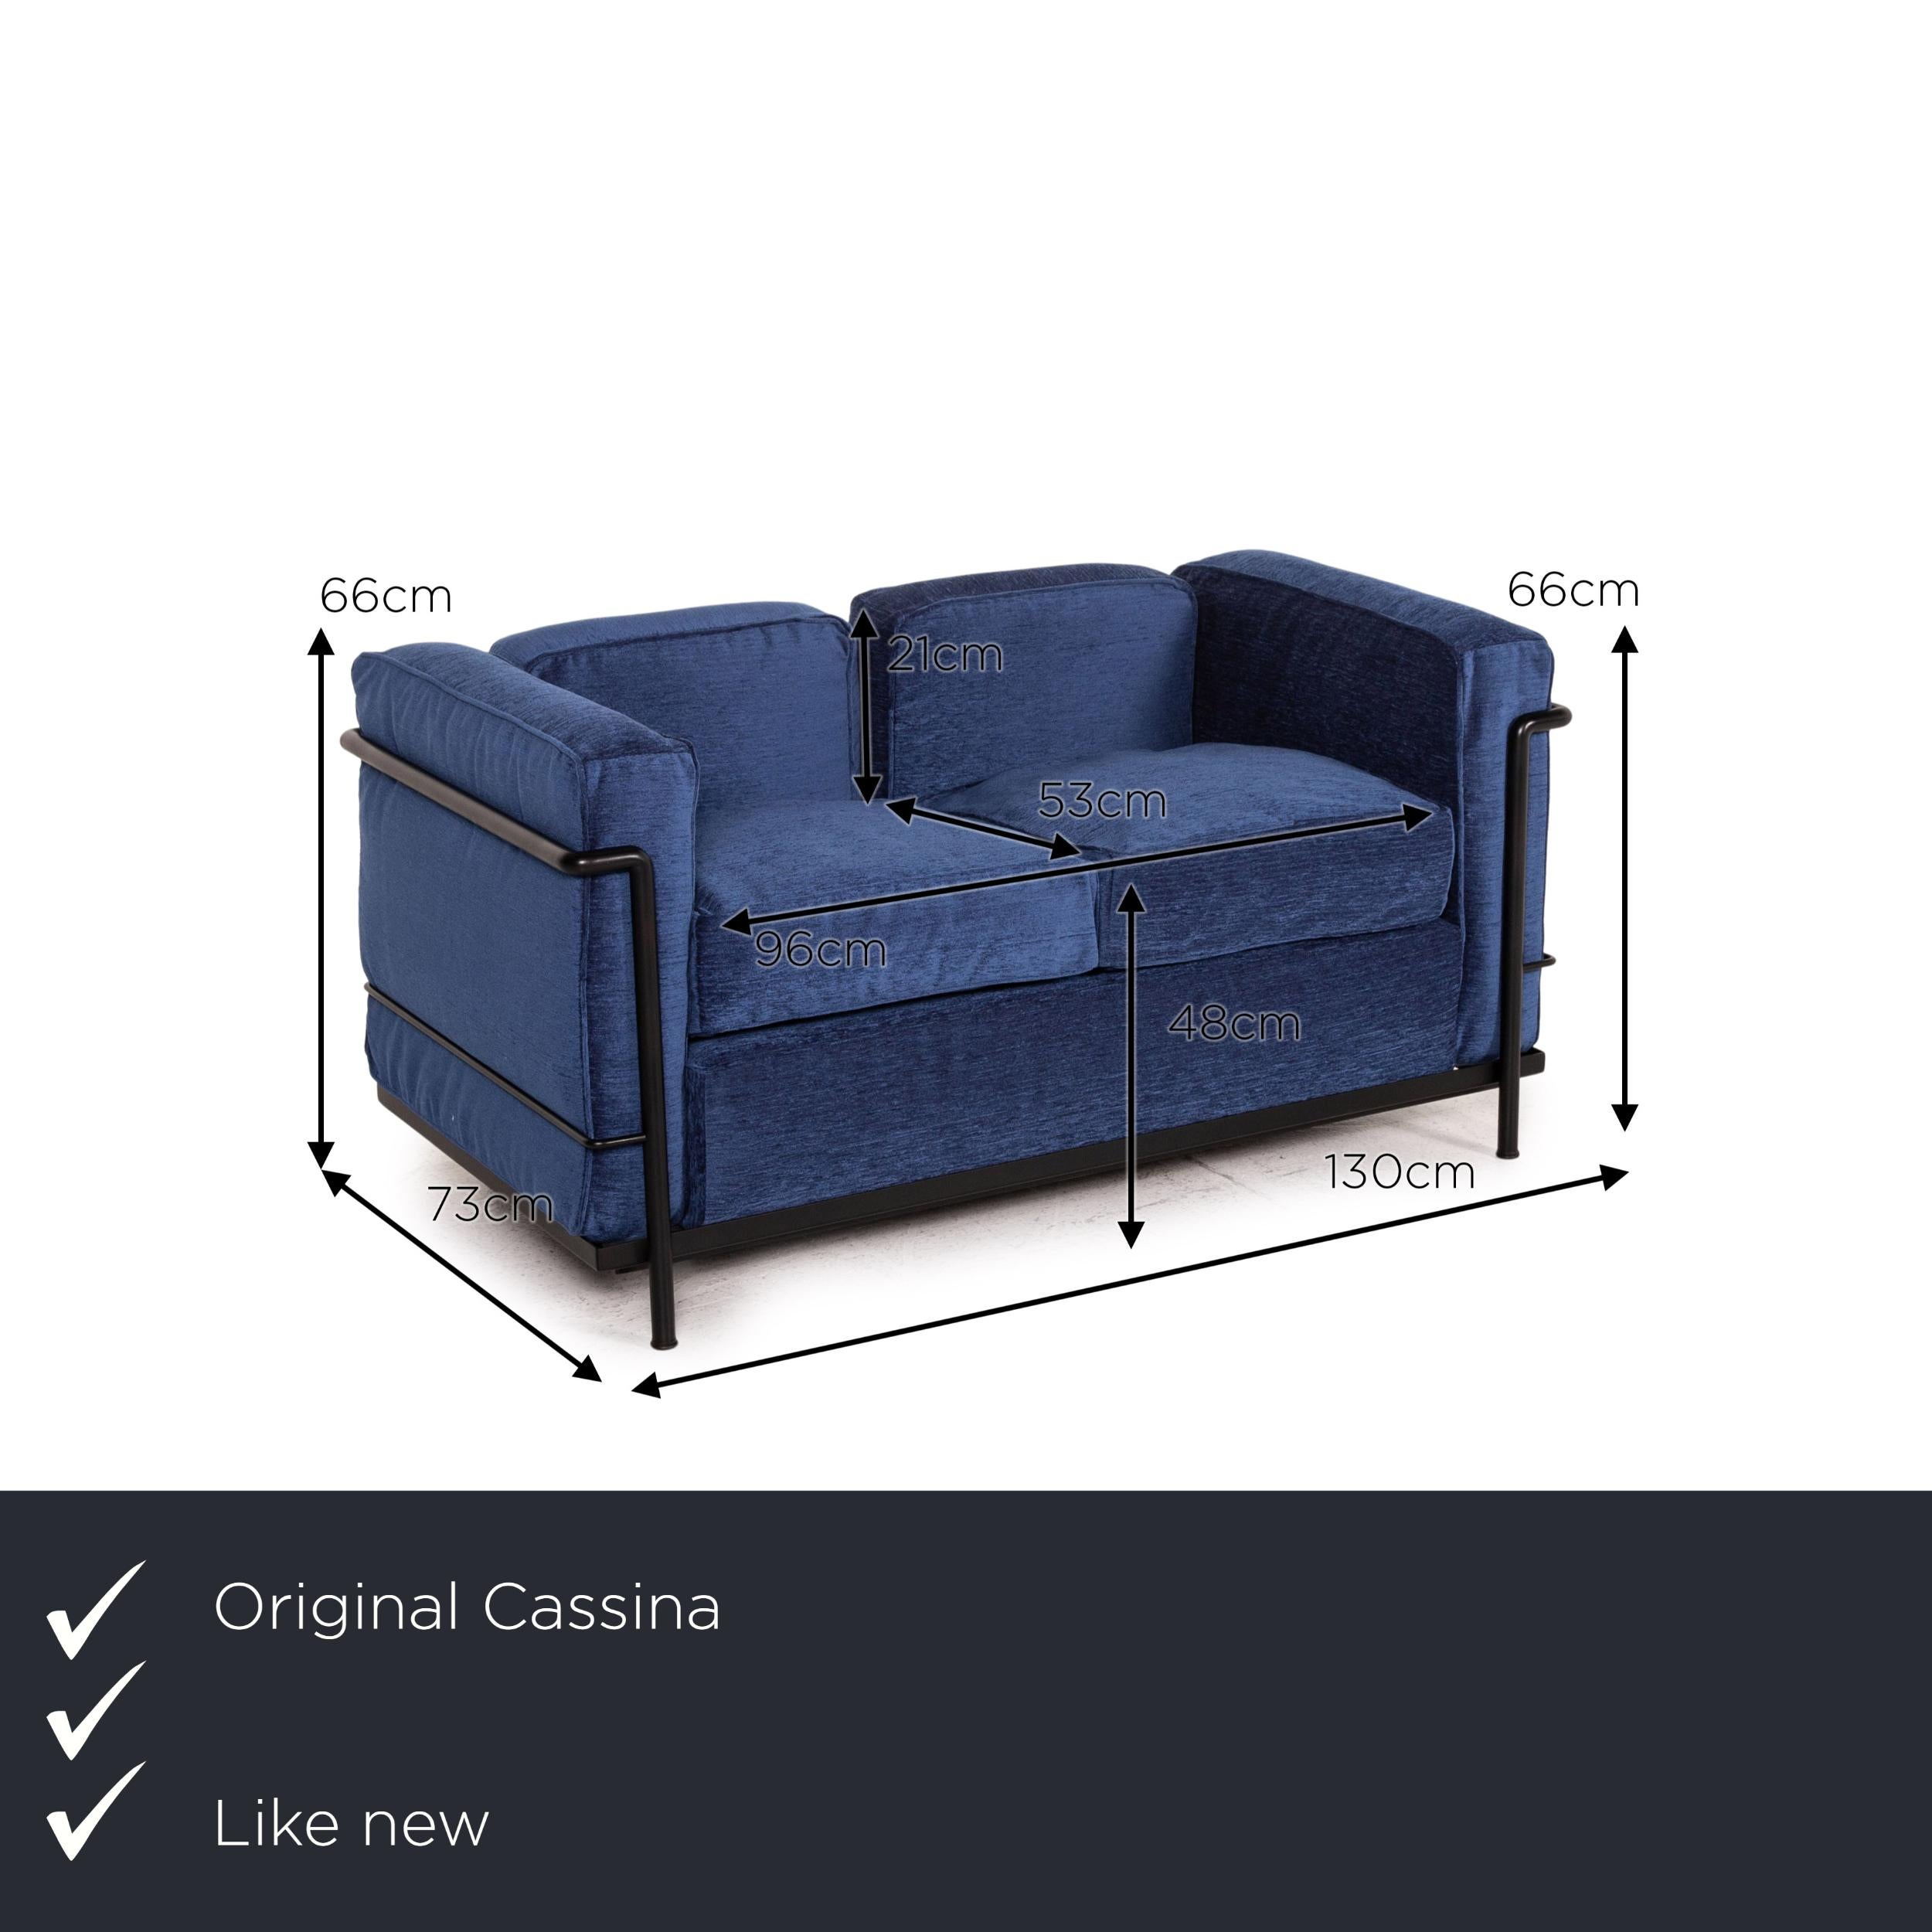 We present to you a Cassina Le Corbusier LC 2 fabric sofa blue two-seater couch.
  
 

 Product measurements in centimeters:
 

 depth: 73
 width: 130
 height: 66
 seat height: 48
 rest height: 66
 seat depth: 53
 seat width: 96
 back